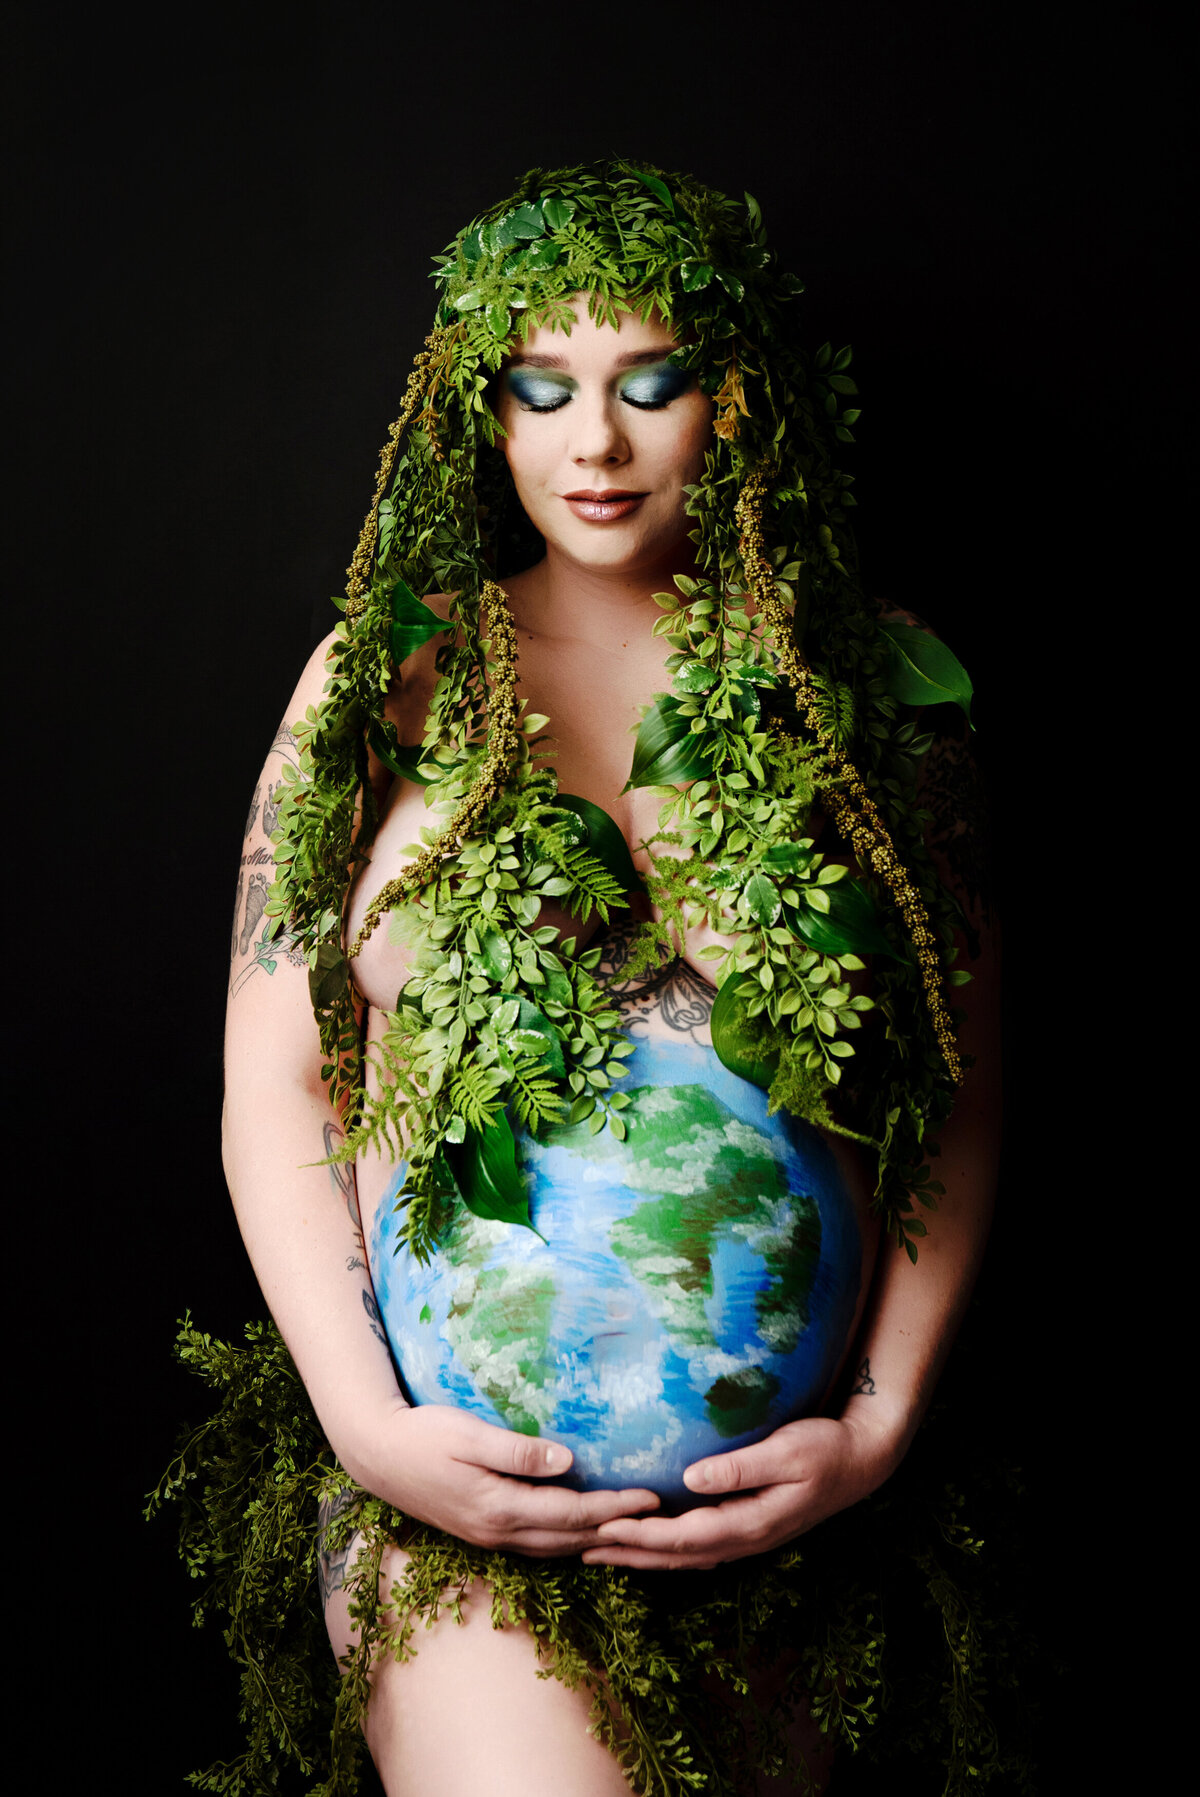 st-louis-maternity-photographer-pregnant-mom-holding-belly-painted-as-earth-posing-as-mother-earth-with-greenery-surrounding-her